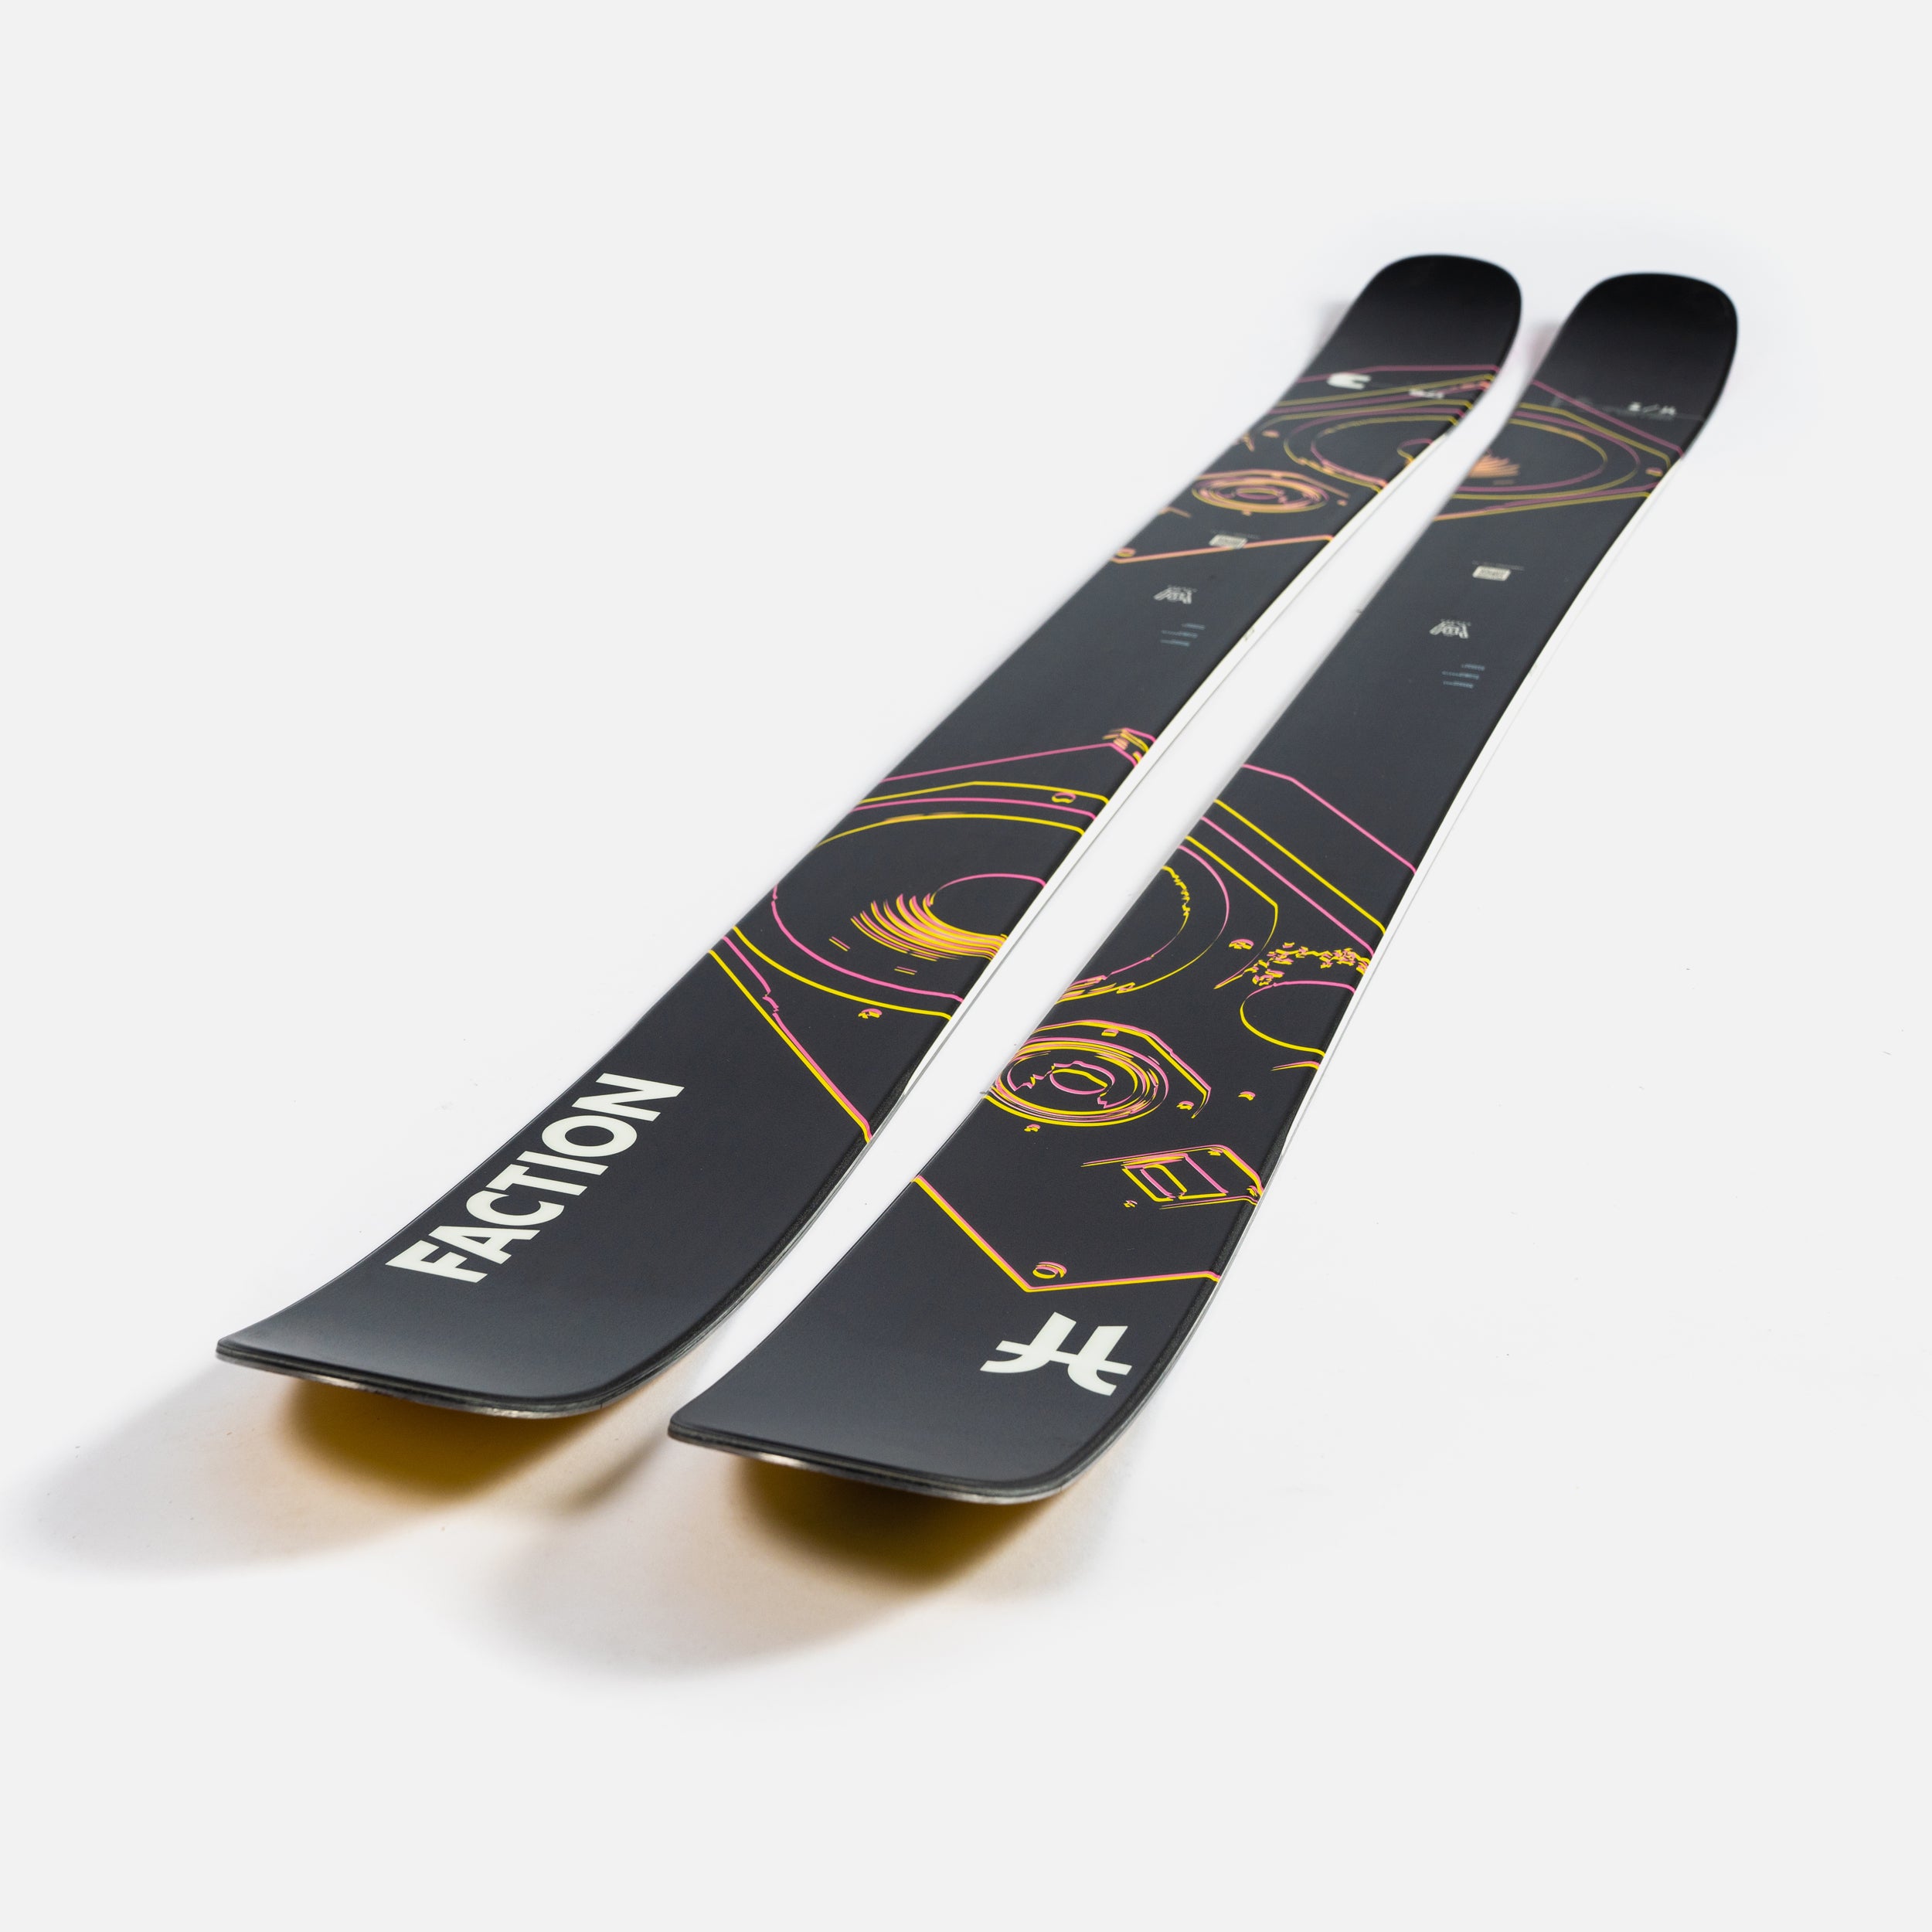 Candide Thovex Signature Series – Faction Skis